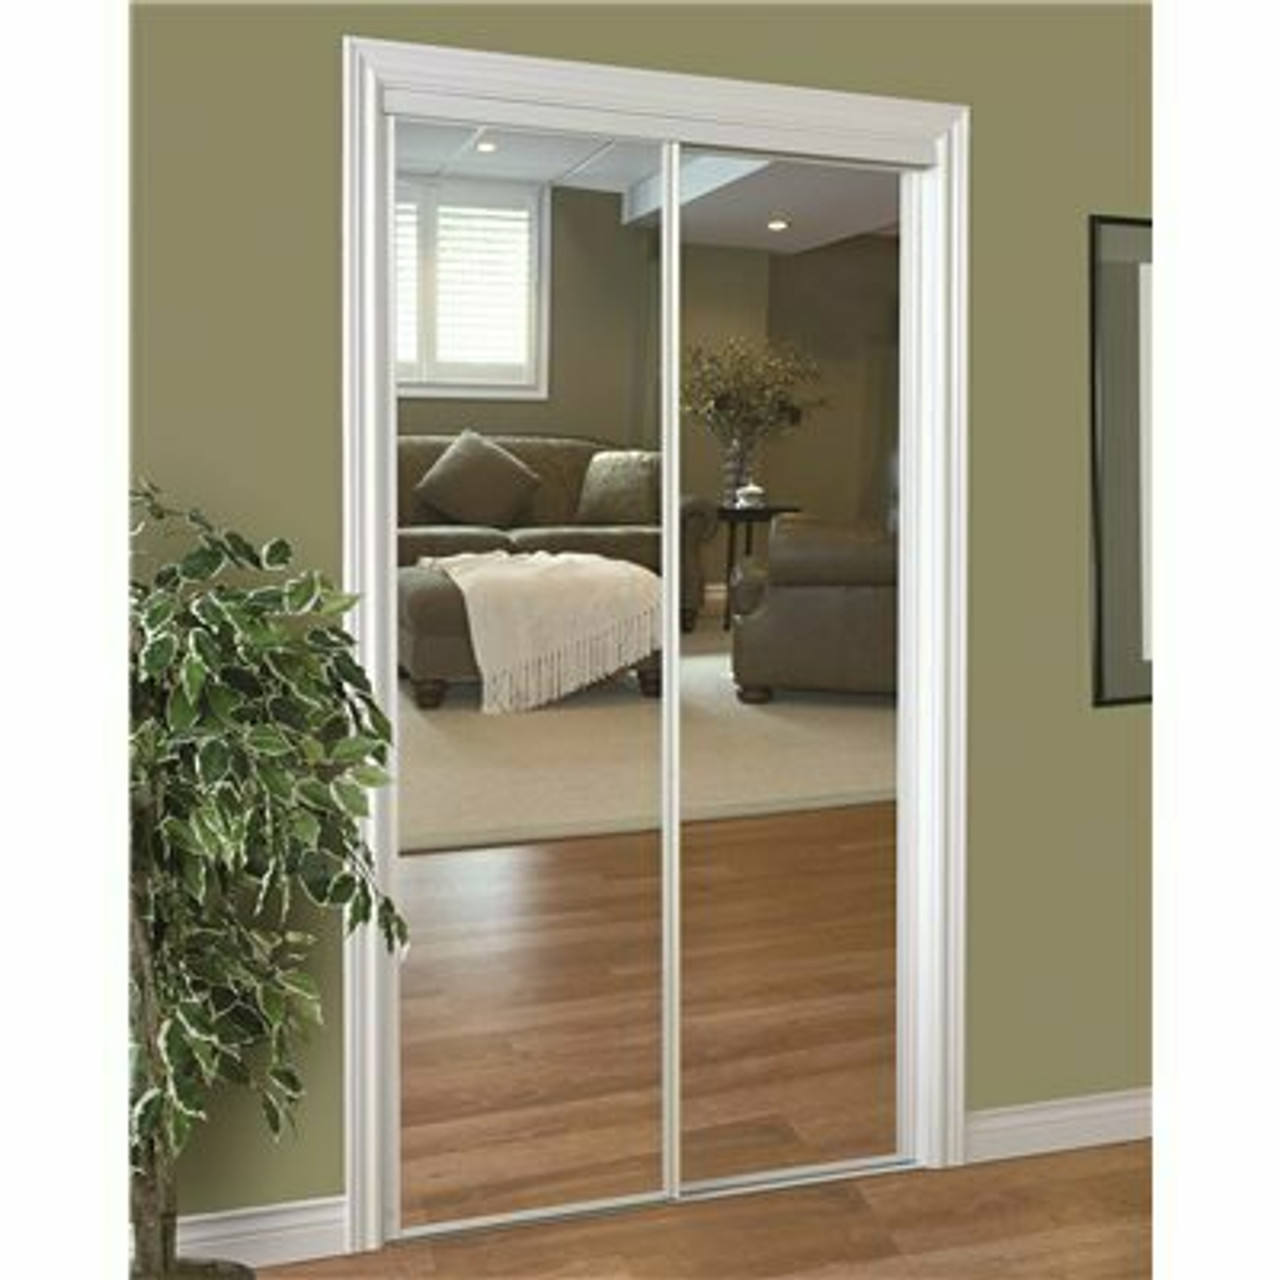 Home Decor Innovations 230 Series Framed Mirror Bypass Door, White, 60X96 In.